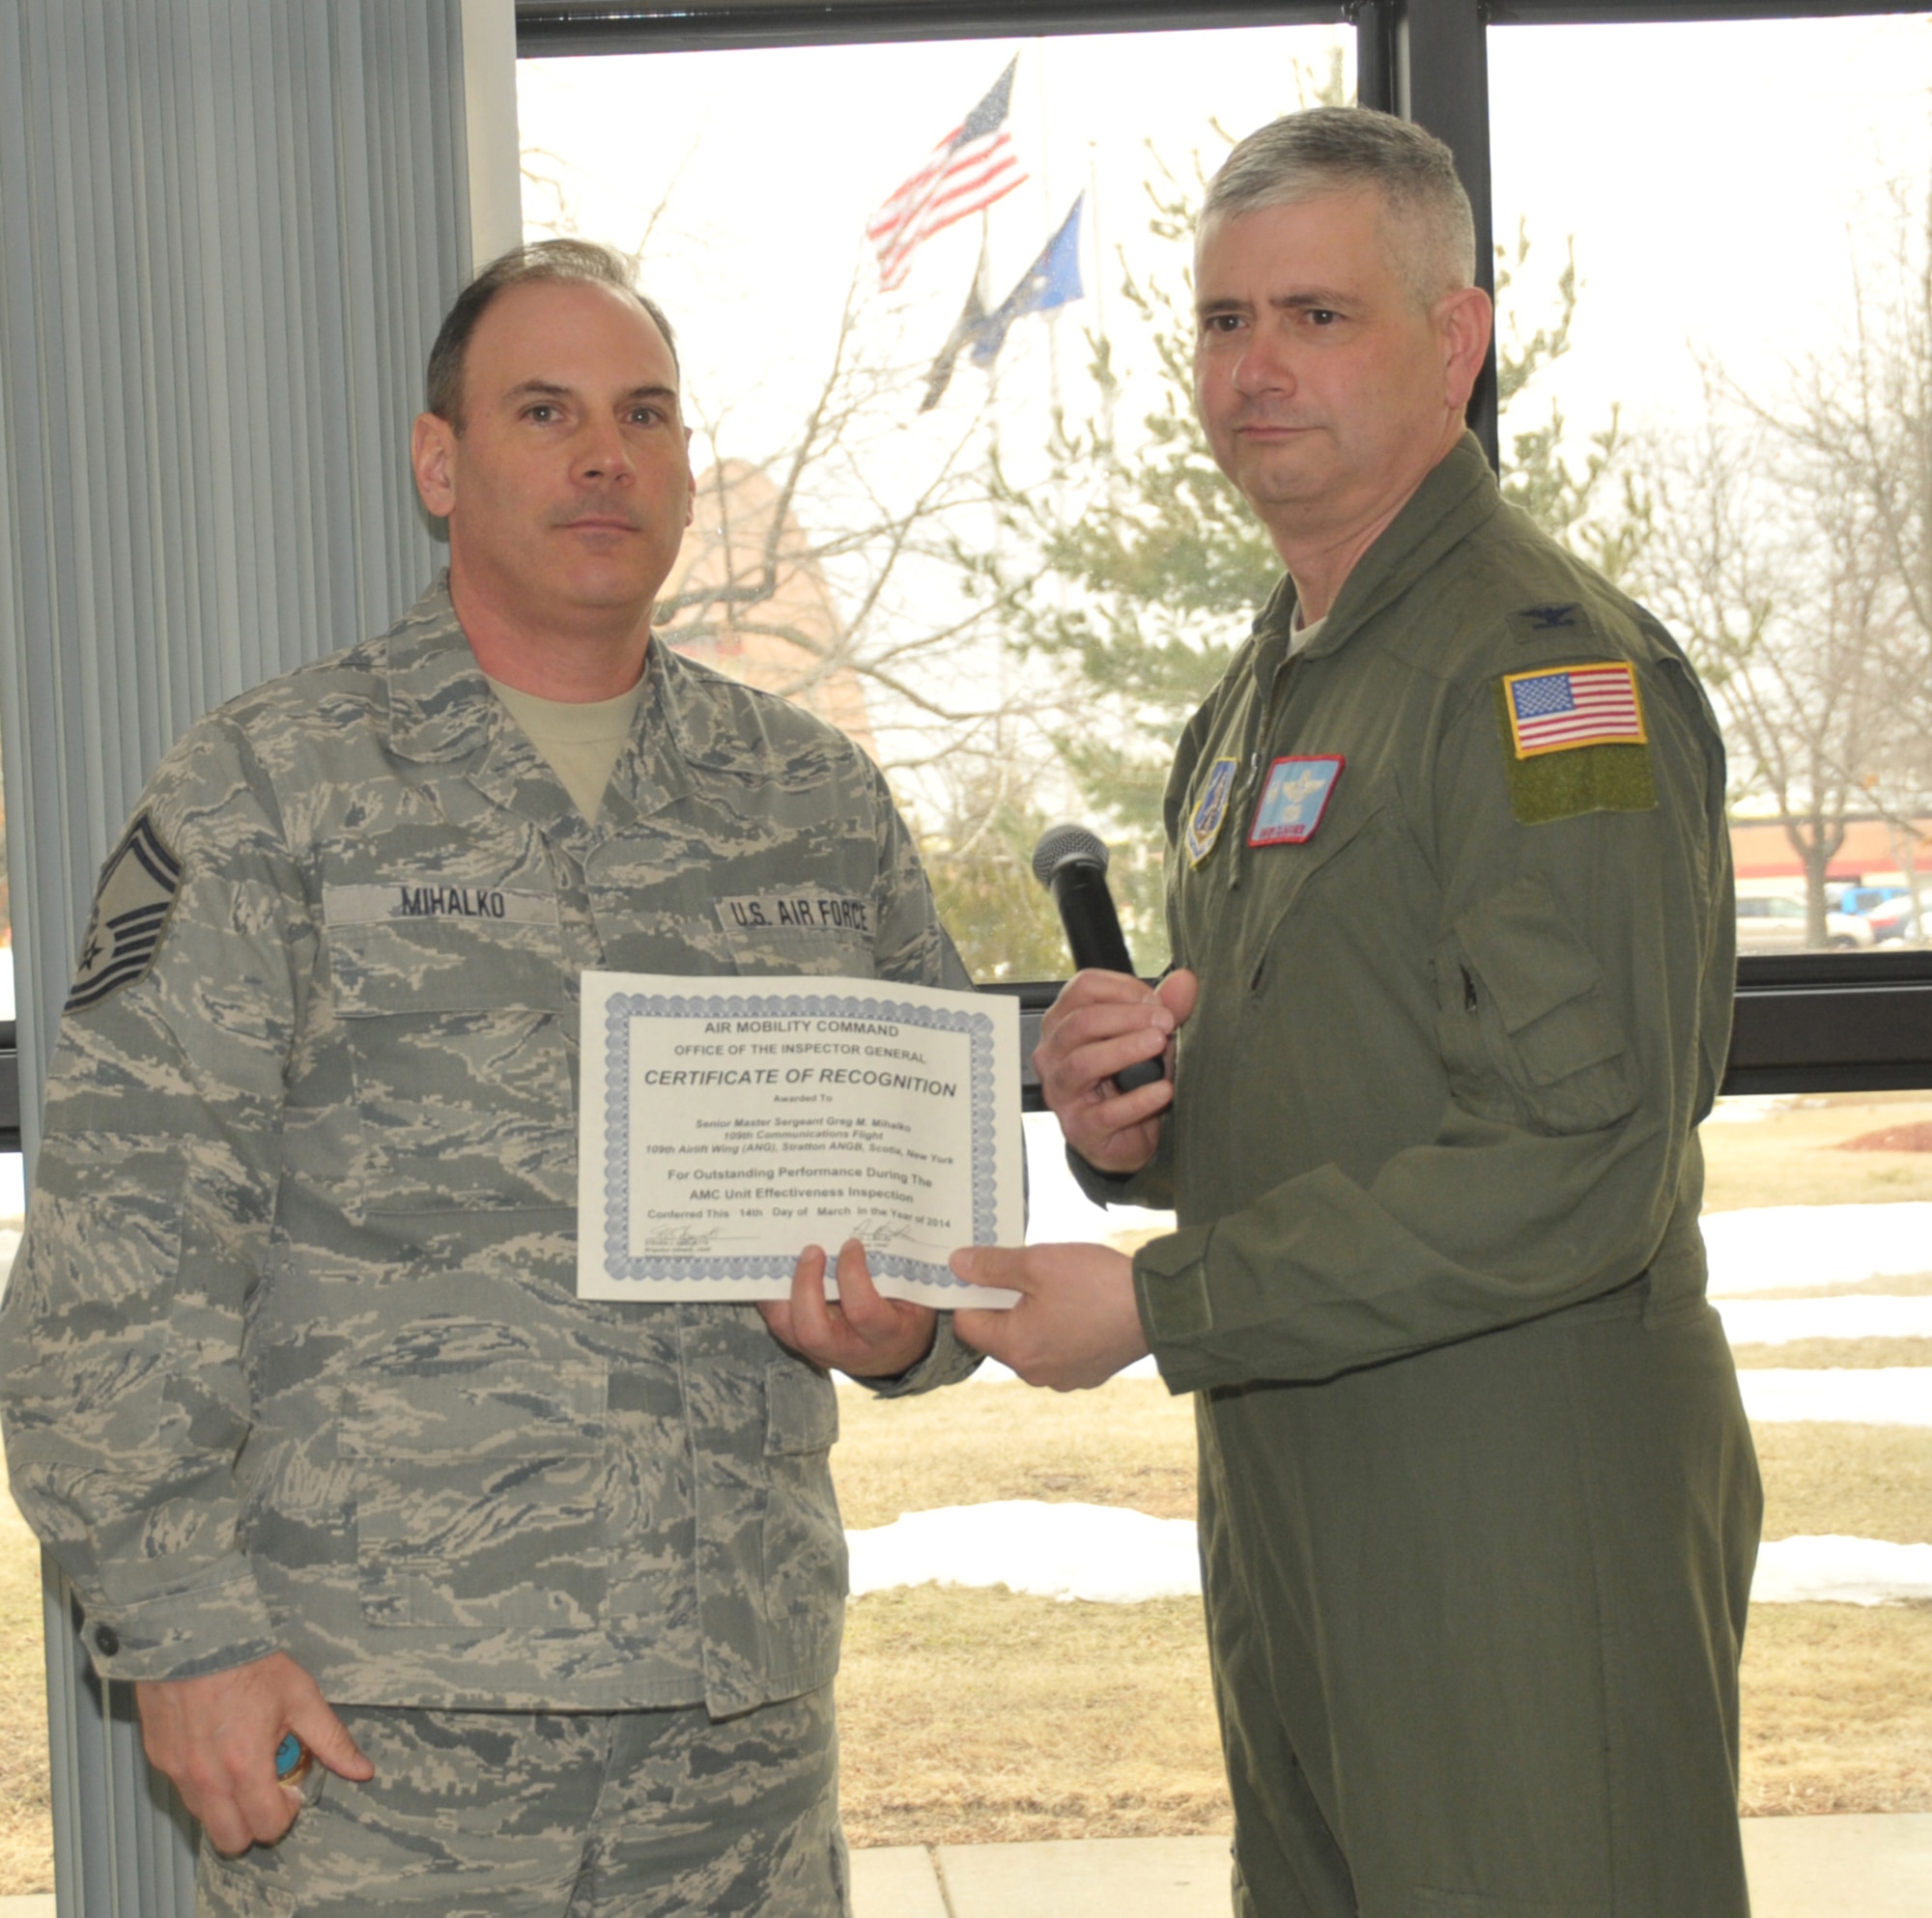 STRATTON AIR NATIONAL GUARD BASE -- Col. Shawn Clouthier (right), 109th Airlift Wing commander, presents Senior Master Sgt. Greg Mihalko with a certificate of recognition March 25, 2014, from Air Mobility Command for outstanding performance during the 109th Airlift Wing's recent Unit Effectiveness Inspection. Mihalko was the sole Inspector General coin recipient for the inspection. He is assigned to the 109th Communications Flight and is also a member of the Wing IG Team. (Air National Guard photo by Master Sgt. William Gizara/Released)